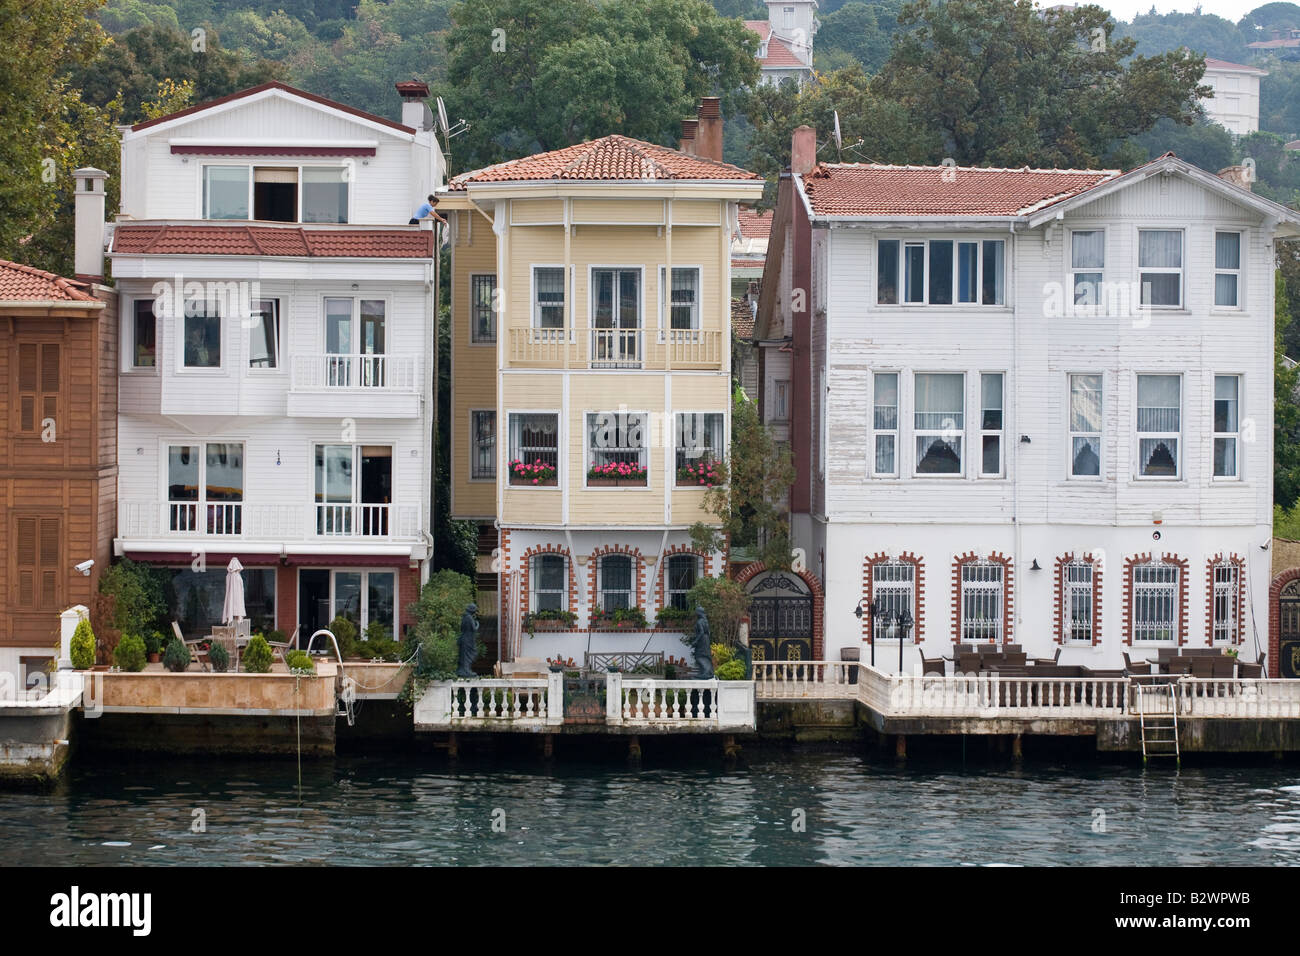 Summer Houses along the Bosporus at Beykoz: Wealthy Turks from Istanbul build waterside retreats in the quiet Bosporus towns Stock Photo